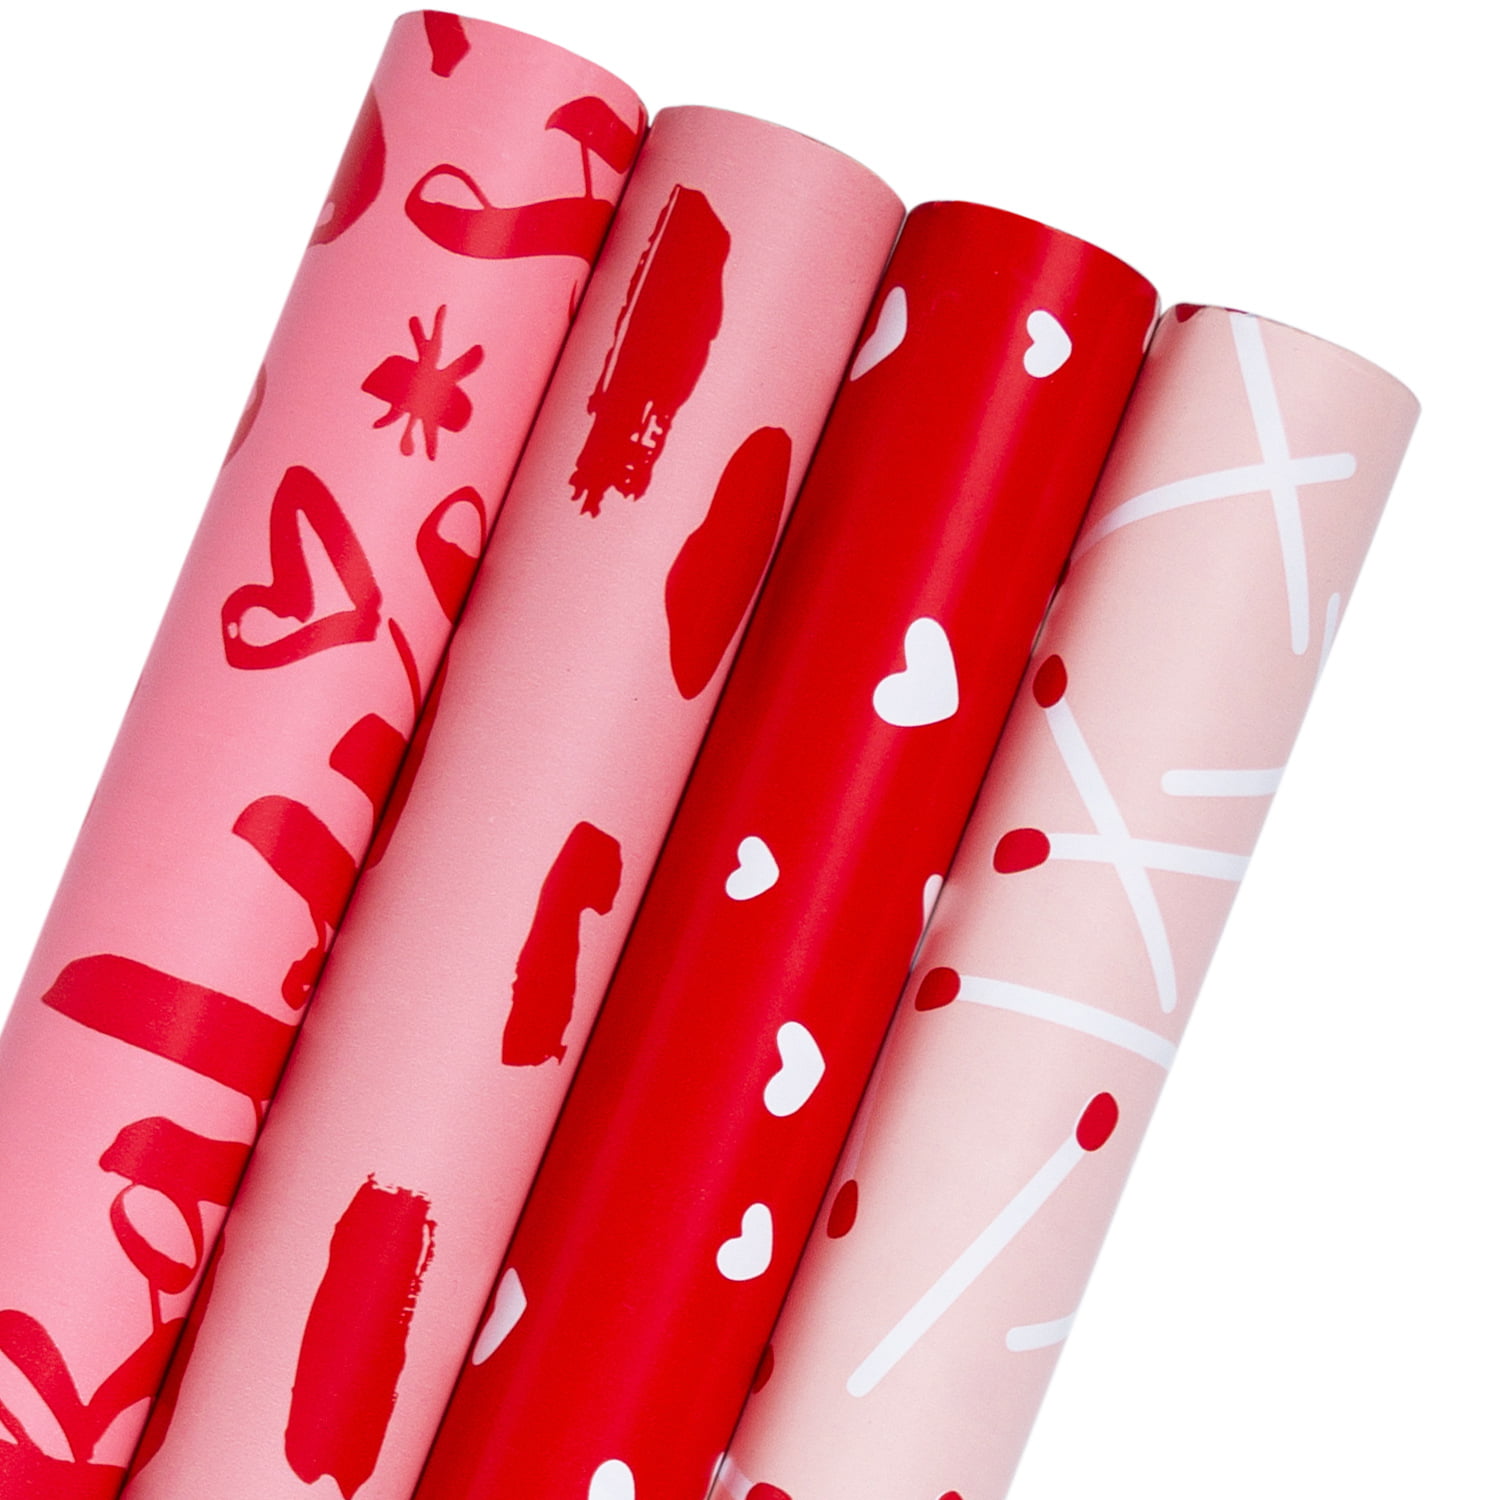 Red Foil Hearts White Gift Wrap Wrapping Paper 2 Sheets 2 Tags Lover Valentine 